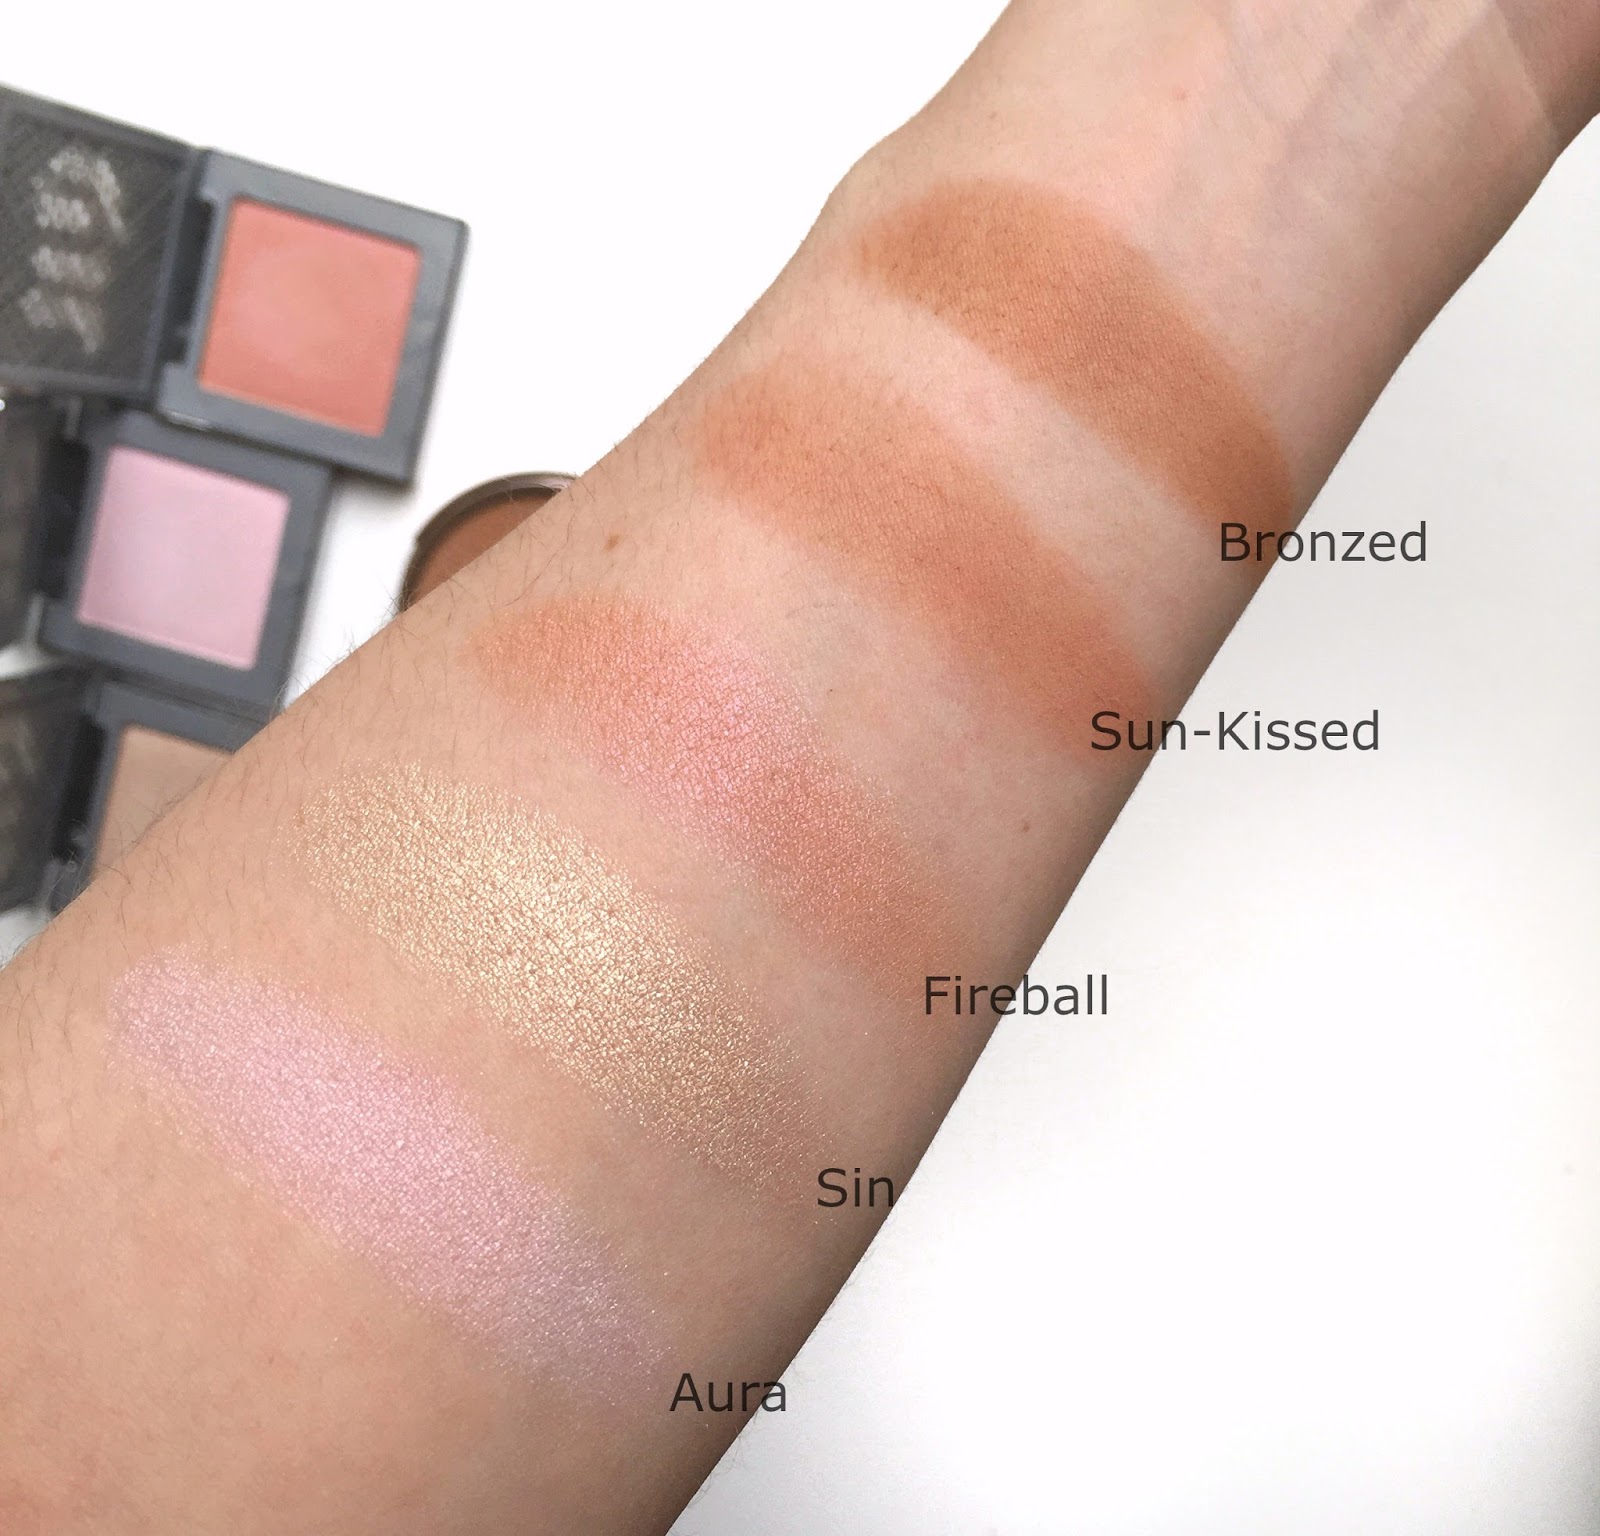 kyst Spiller skak Appel til at være attraktiv Urban Decay Summer 2016 Beach Bronzers and After Glow Highlighters with  Swatches | alittlebitetc